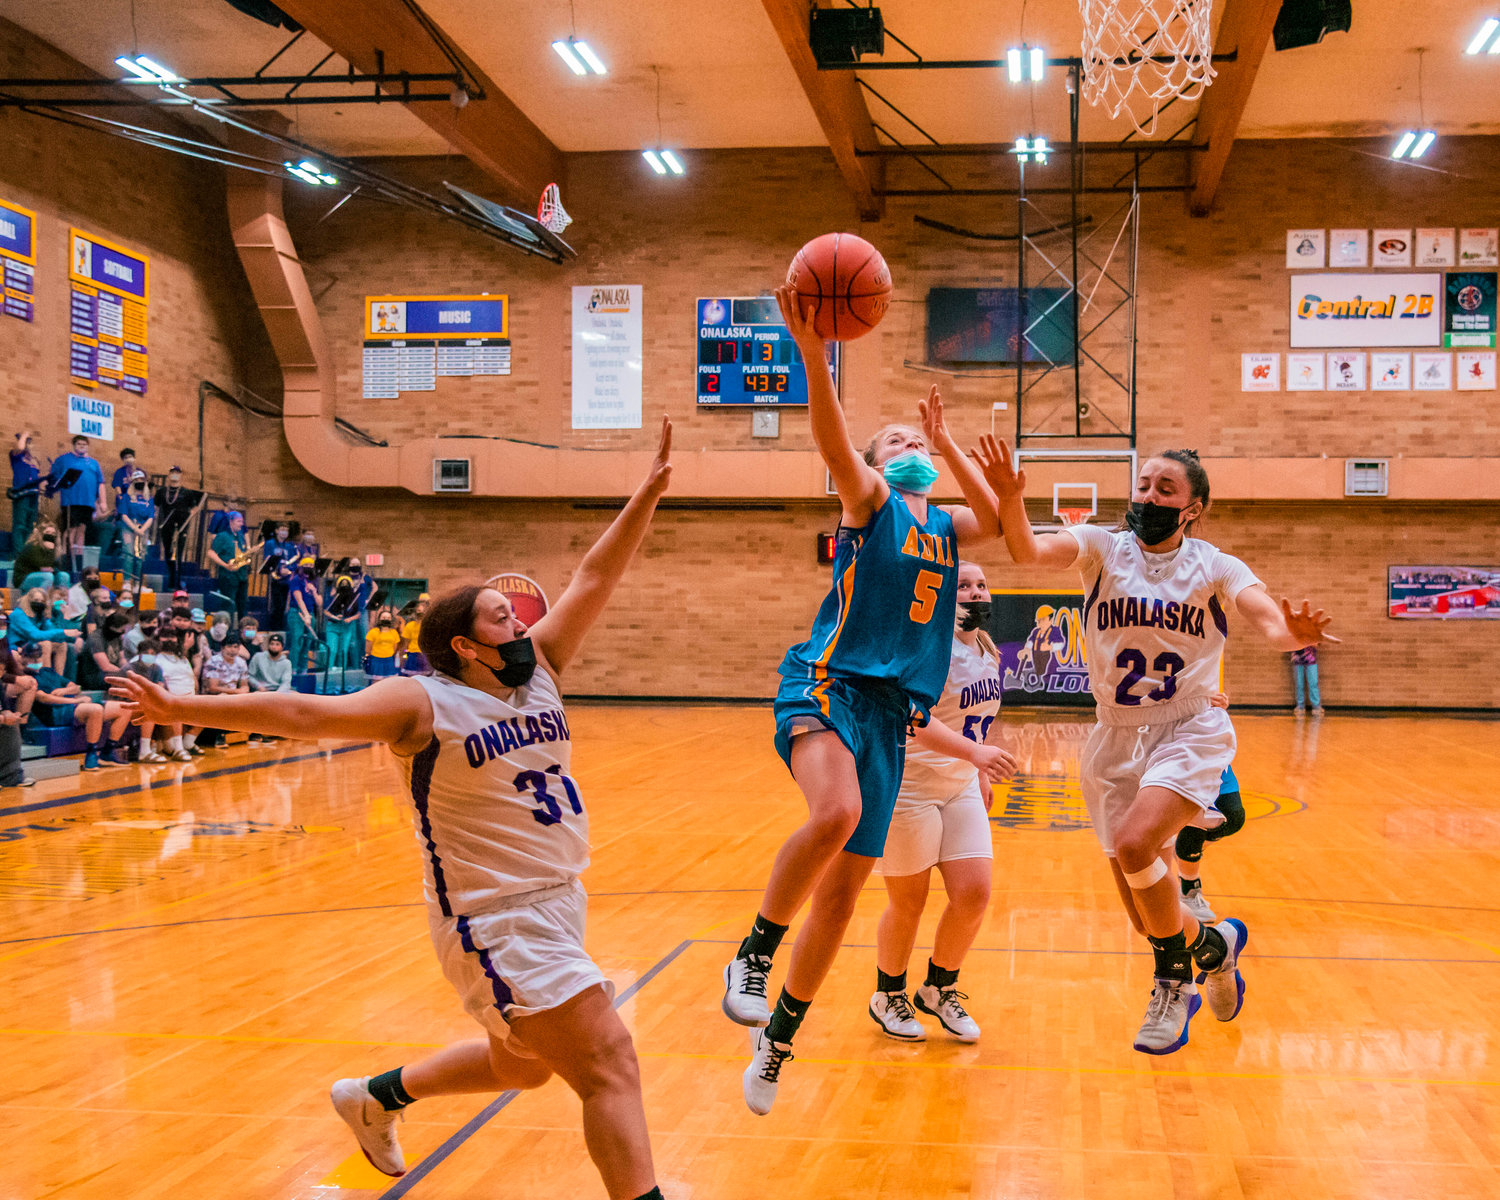 FILE PHOTO - Adna’s Kaylin Todd (5) goes up for a layup during a game against Onalaska on Thursday.